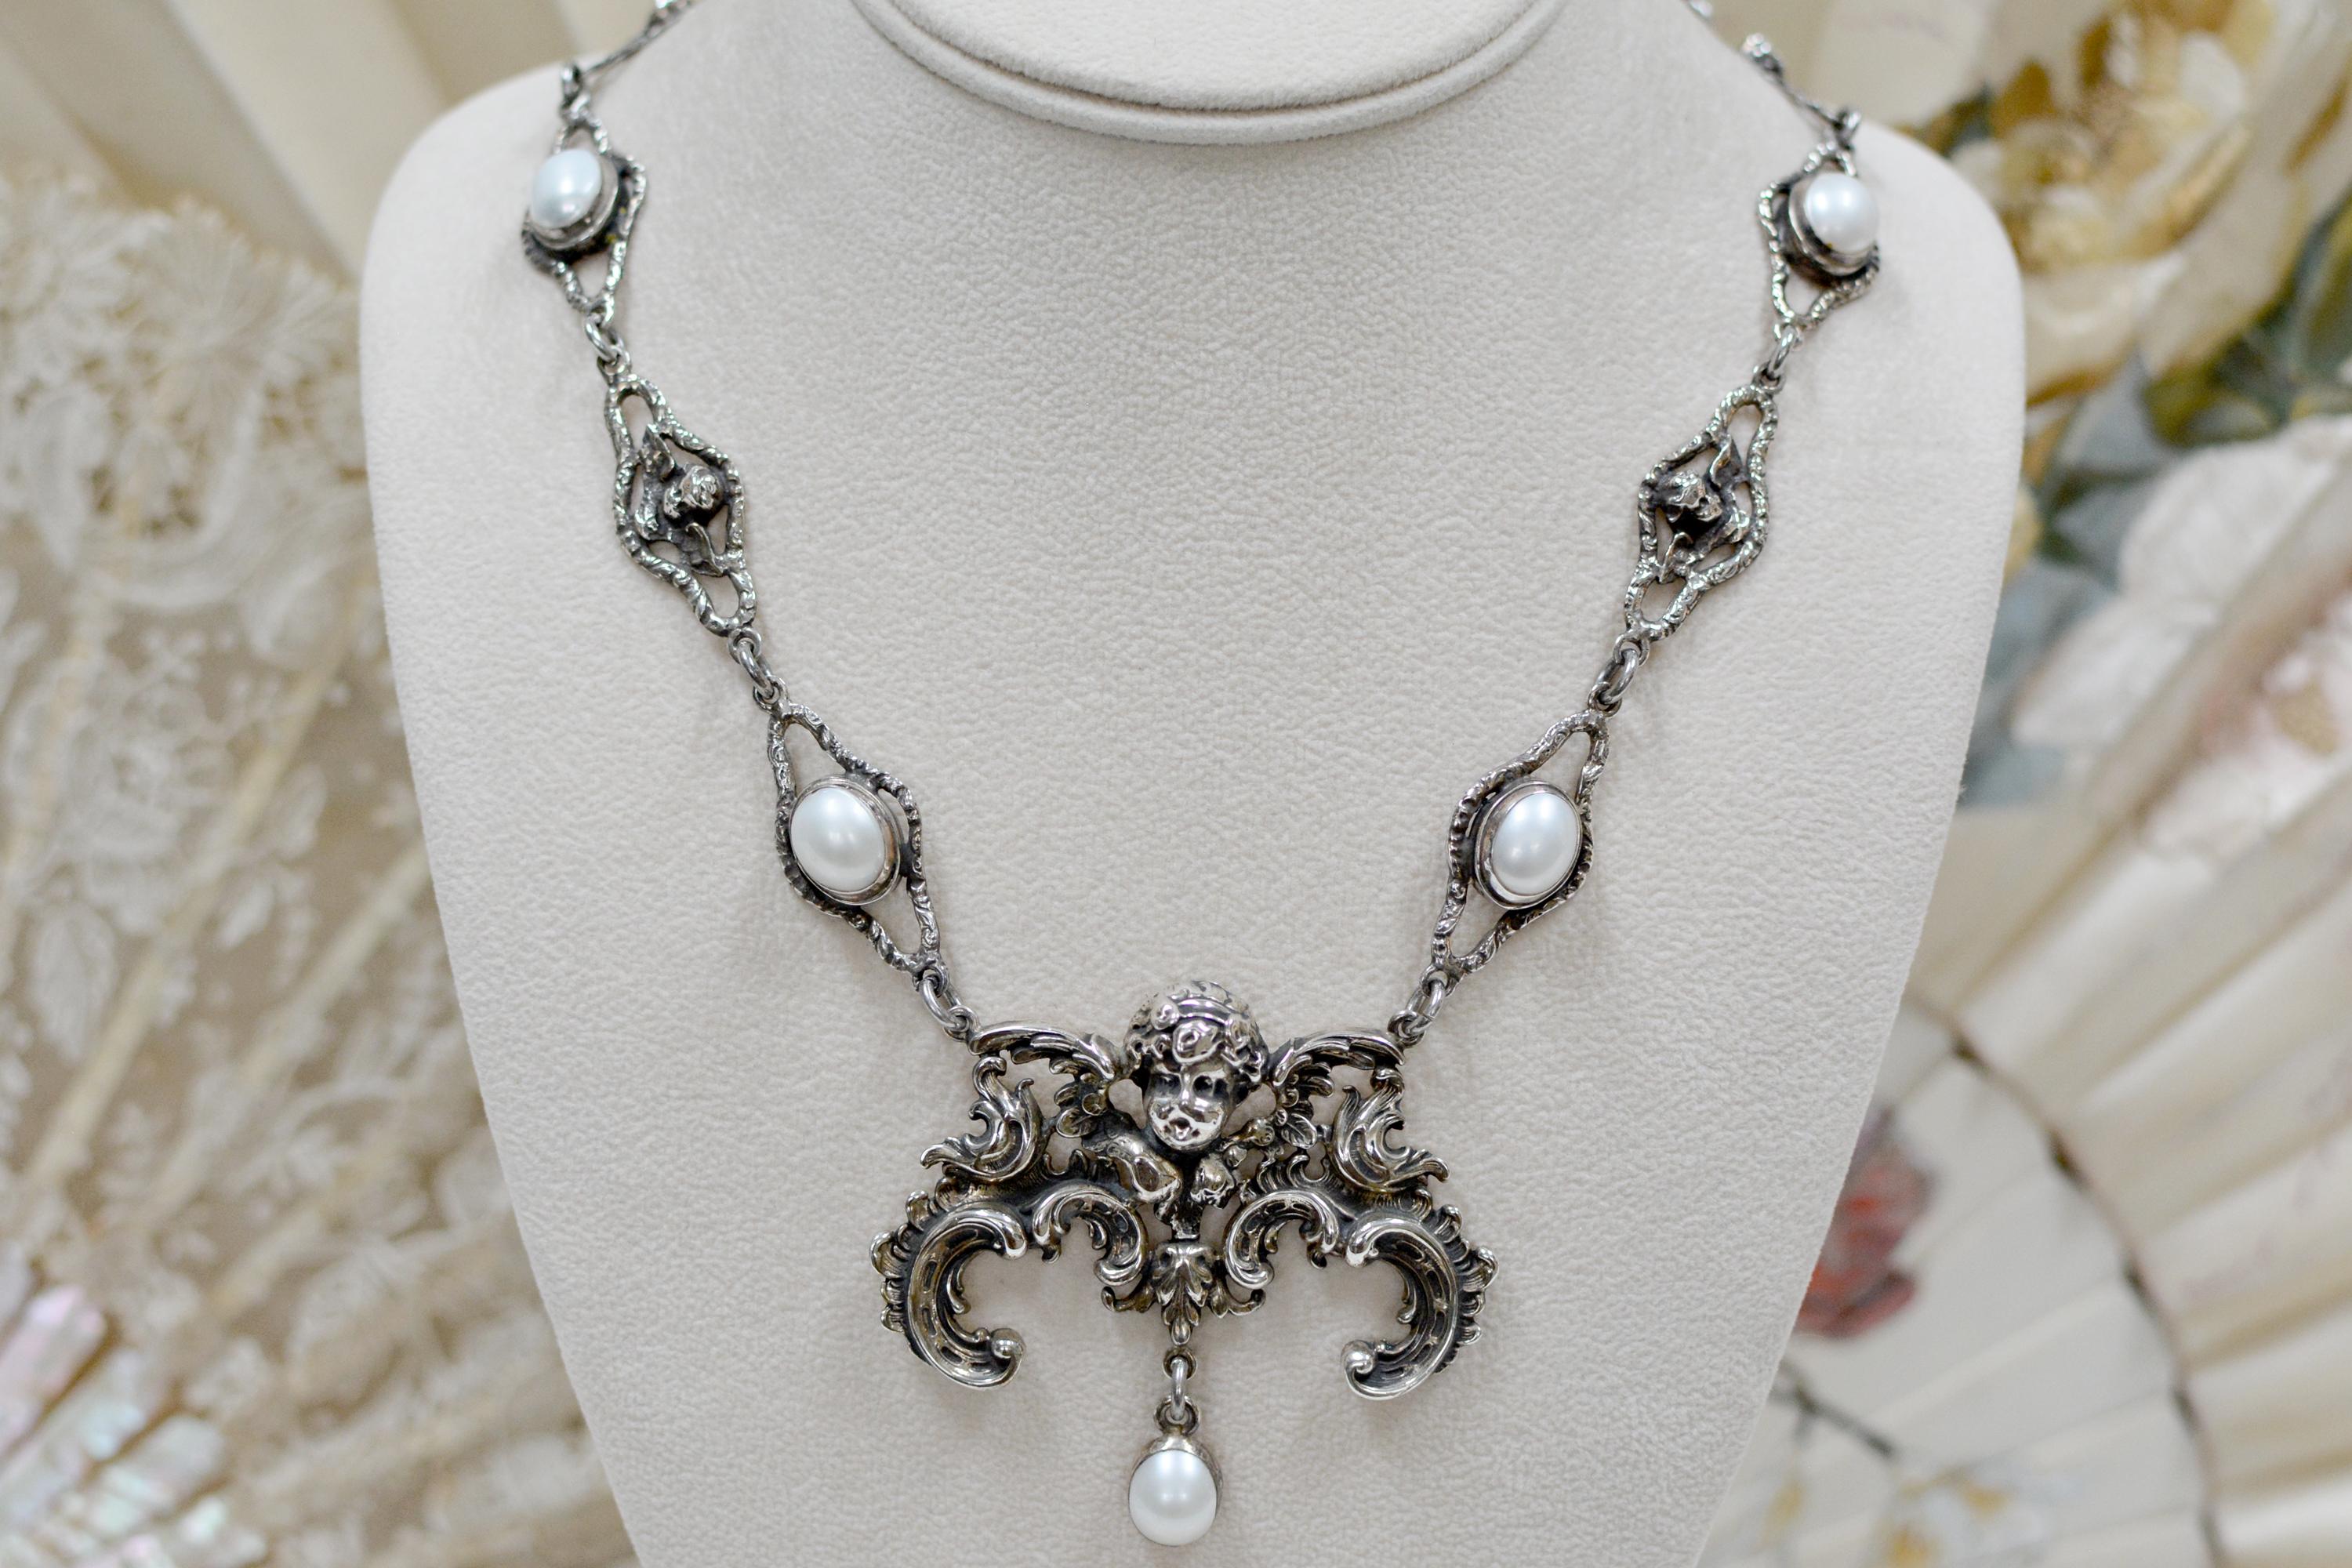 This one of a kind sterling silver drop necklace accentuates heavenly elements found in adornments throughout history. A grand figural angel establishes a bold center element for the necklace, which has a single 12 x 10 mm oval Freshwater pearl